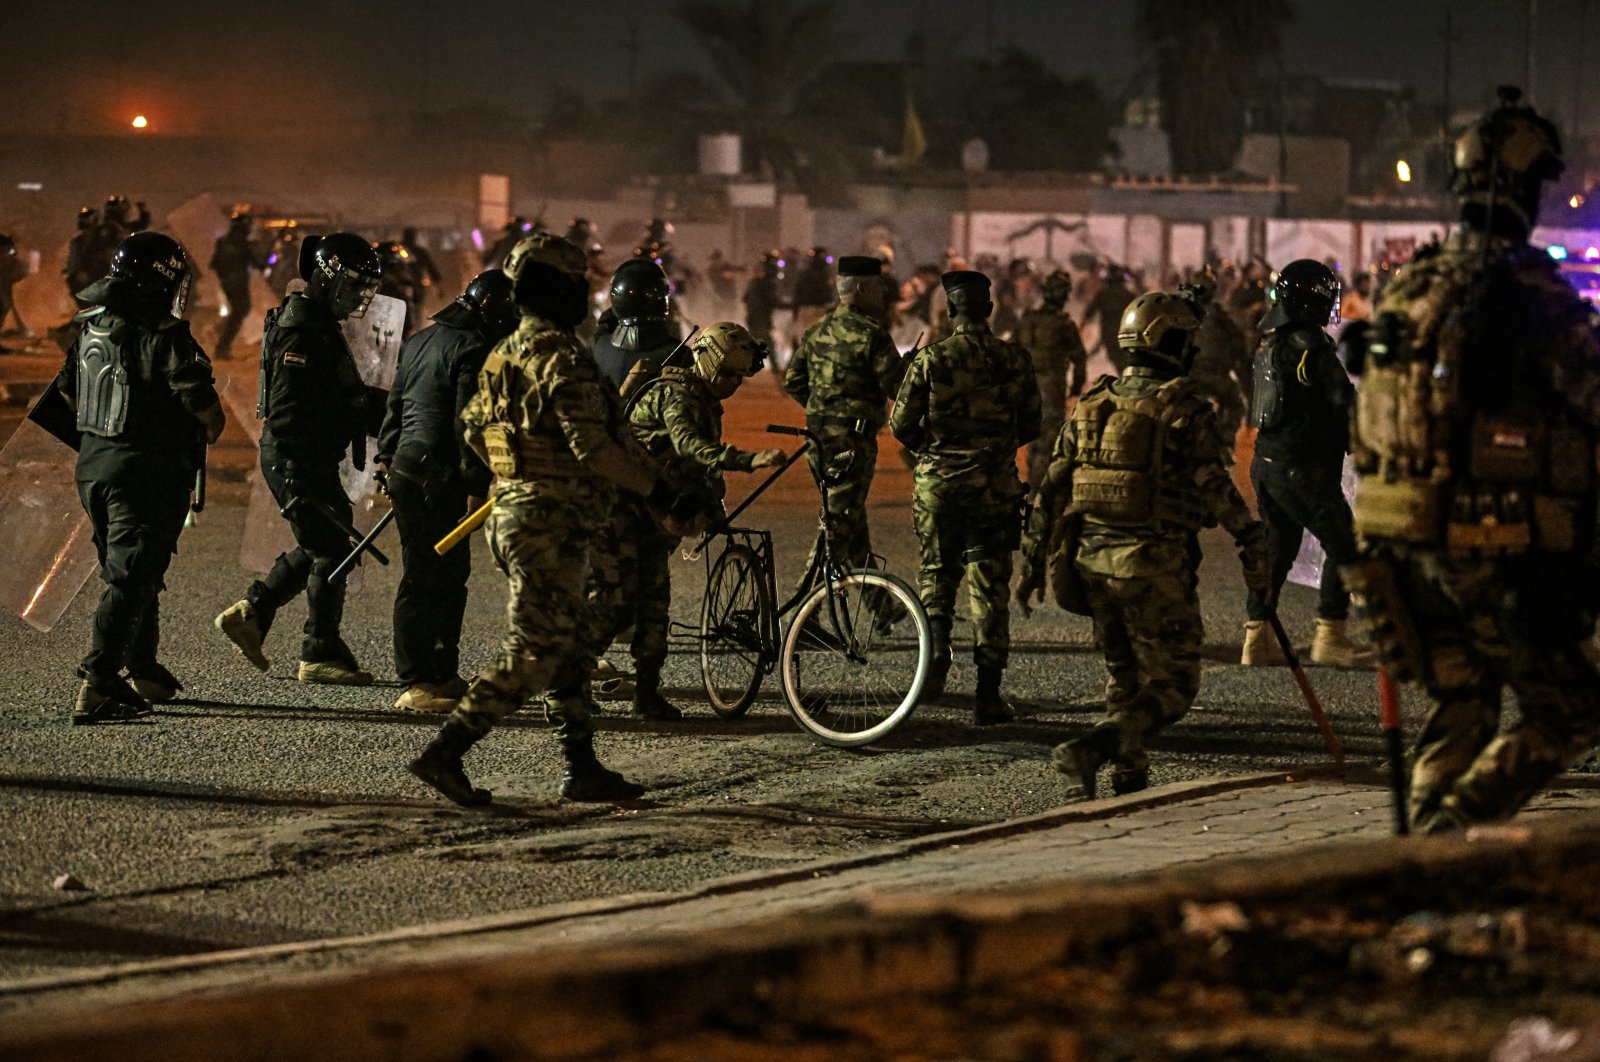 Security forces prevent anti-government protesters from setting up sit-in tents in Basra, Iraq, Nov. 6, 2020. (AP Photo)